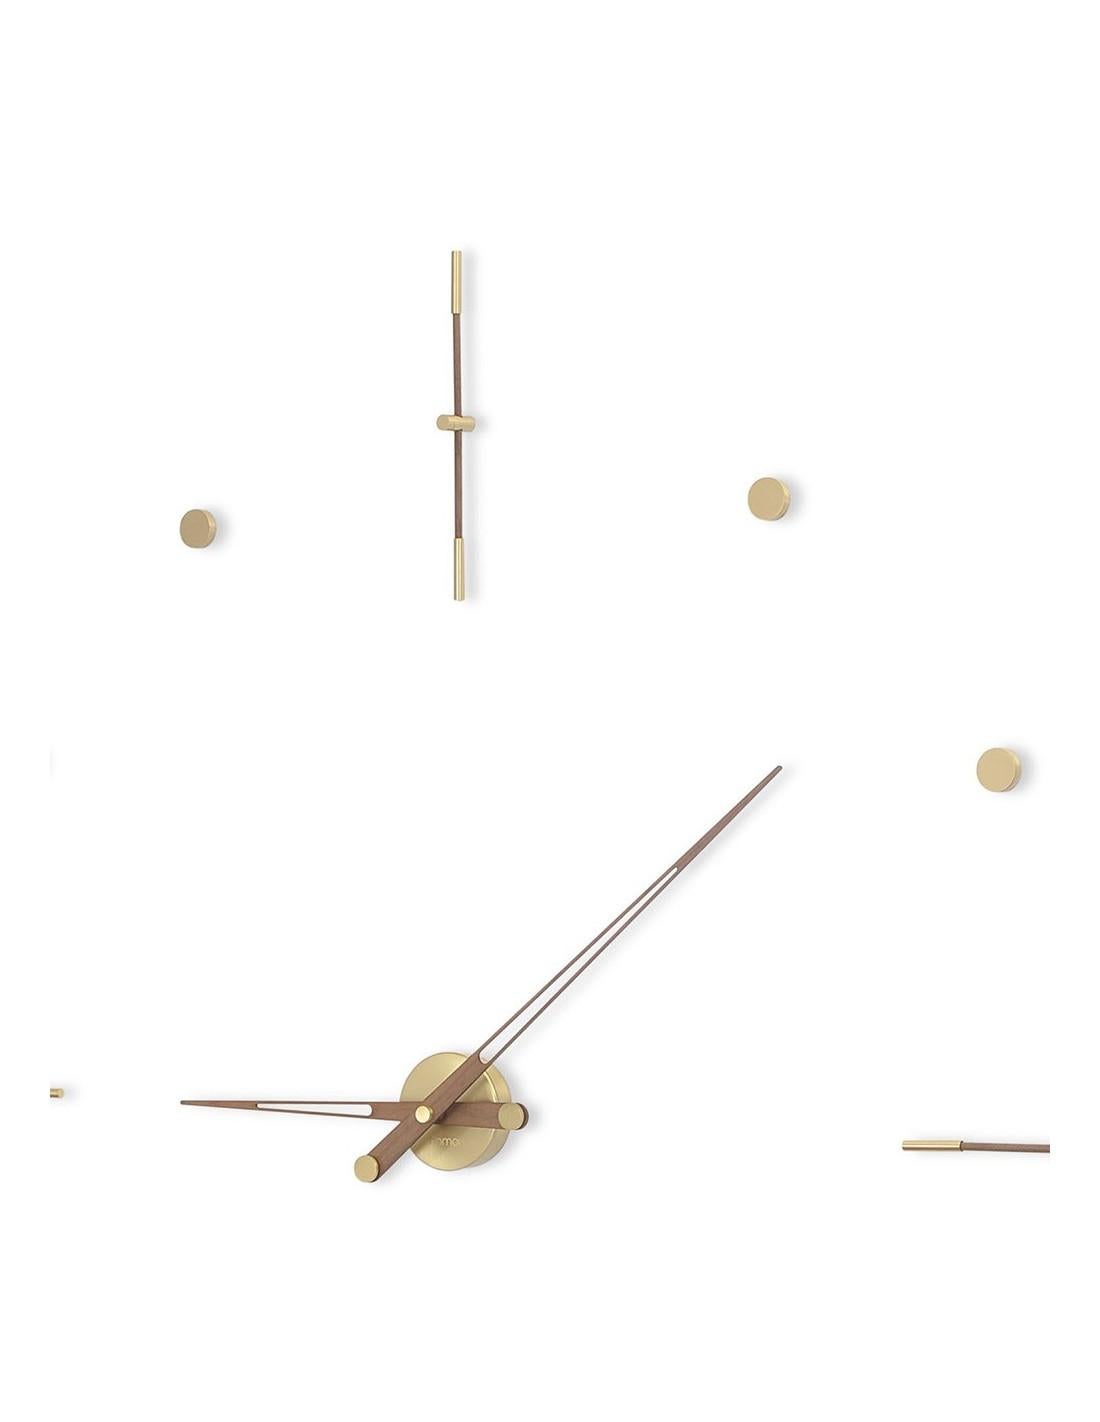 Mixto Gold N wall clock has an elegant and dynamic design , combining fine wood and chrome steel materials.
Mixto N wall clock : Polished brass and walnut, hands in walnut.
 Polished brass and wenge finish, hands in wenge finish.
Available in 2